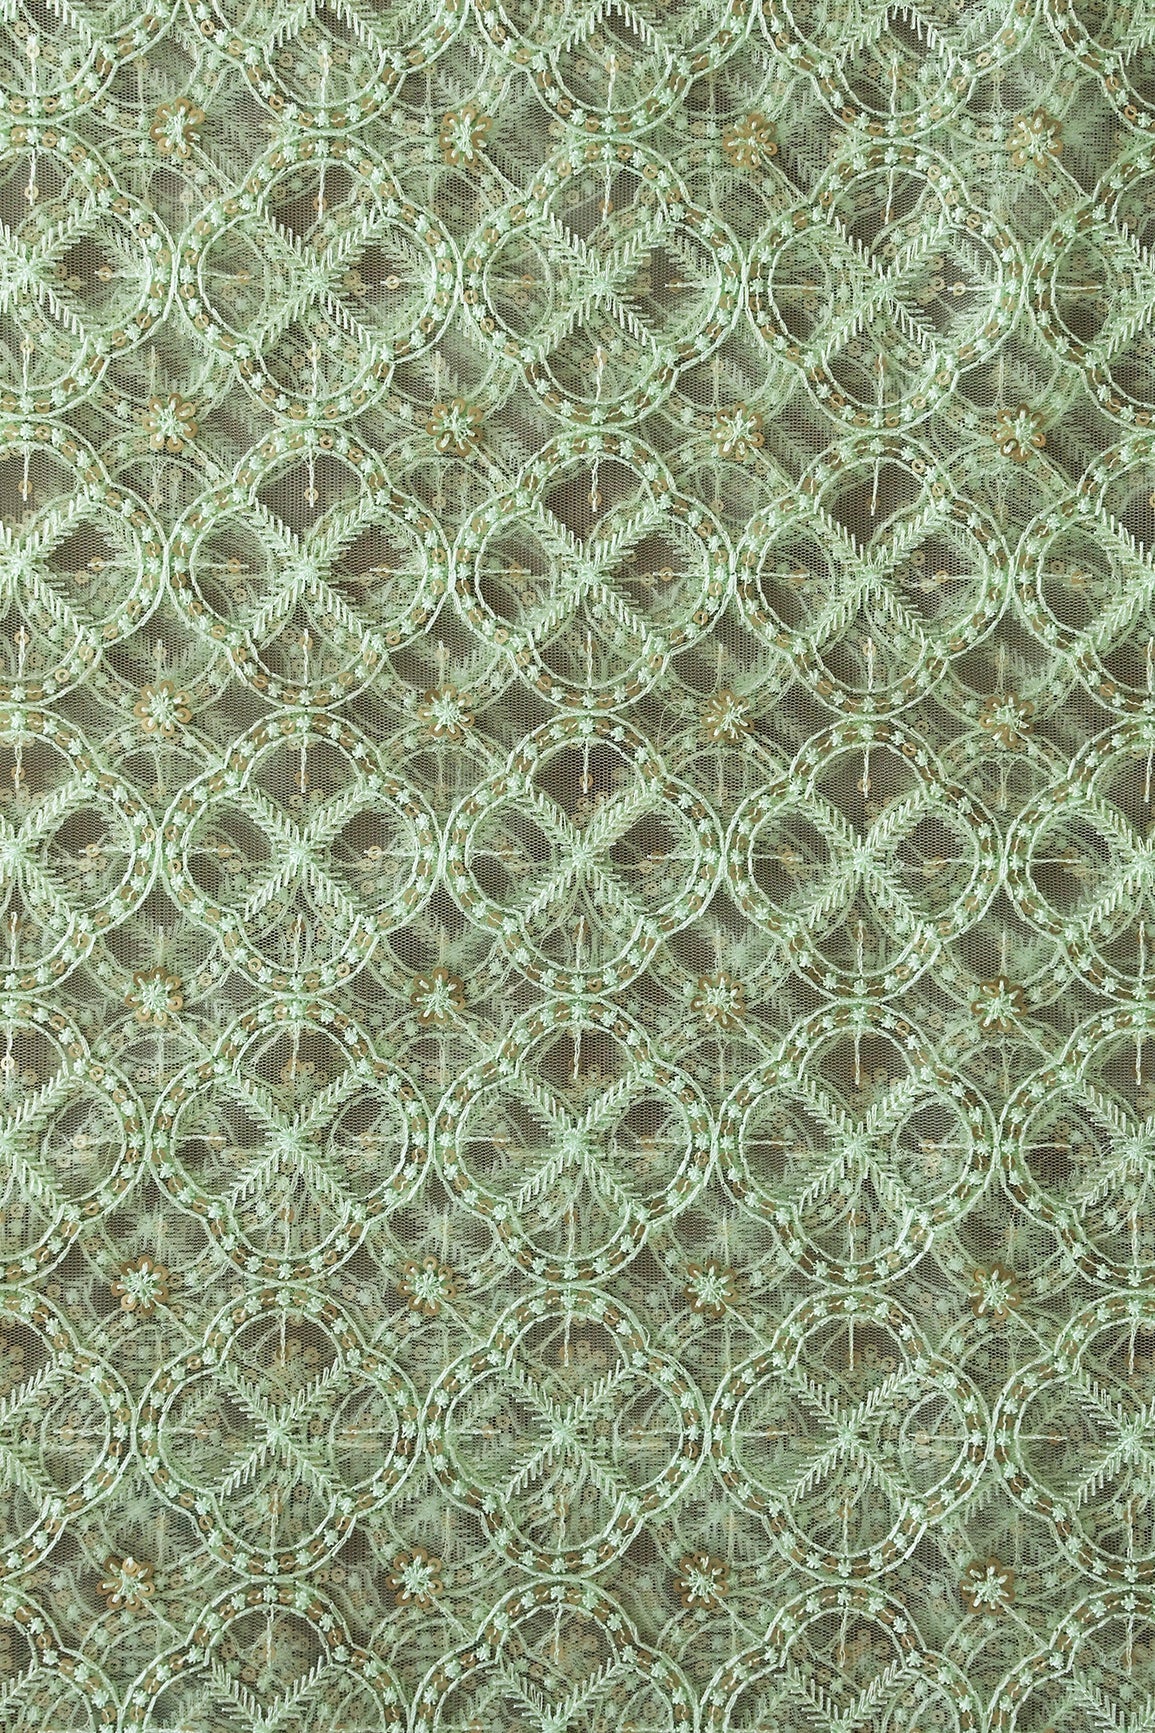 6.75 Meter Cut Piece Of Olive Thread With Gold Sequins Geometric Embroidery On Olive Soft Net Fabric - doeraa